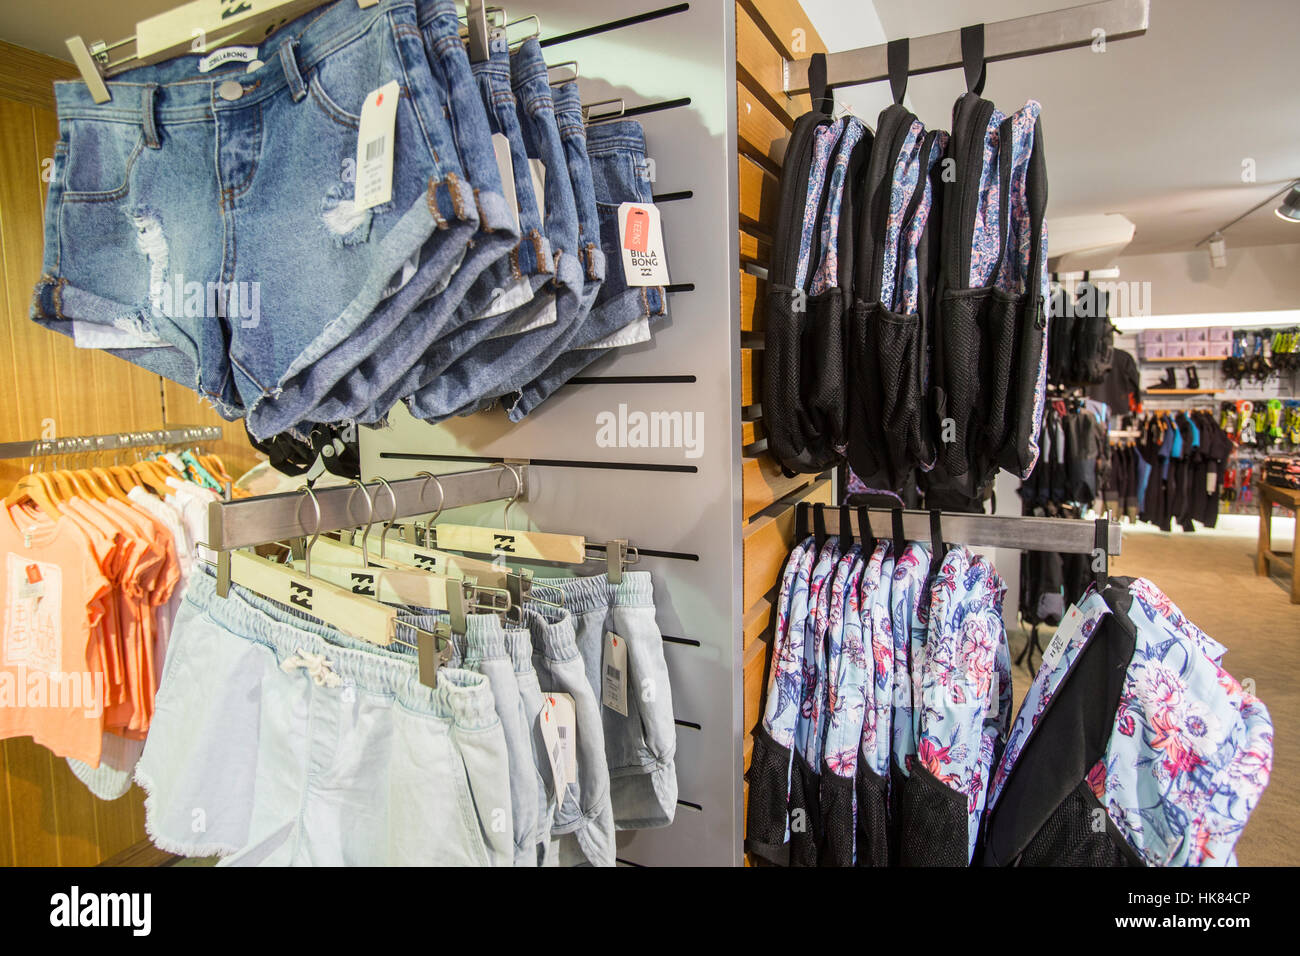 Interior of a Billabong Surf wear gear store shop in Manly Beach,Sydney,New South Wales,Australia Stock Photo